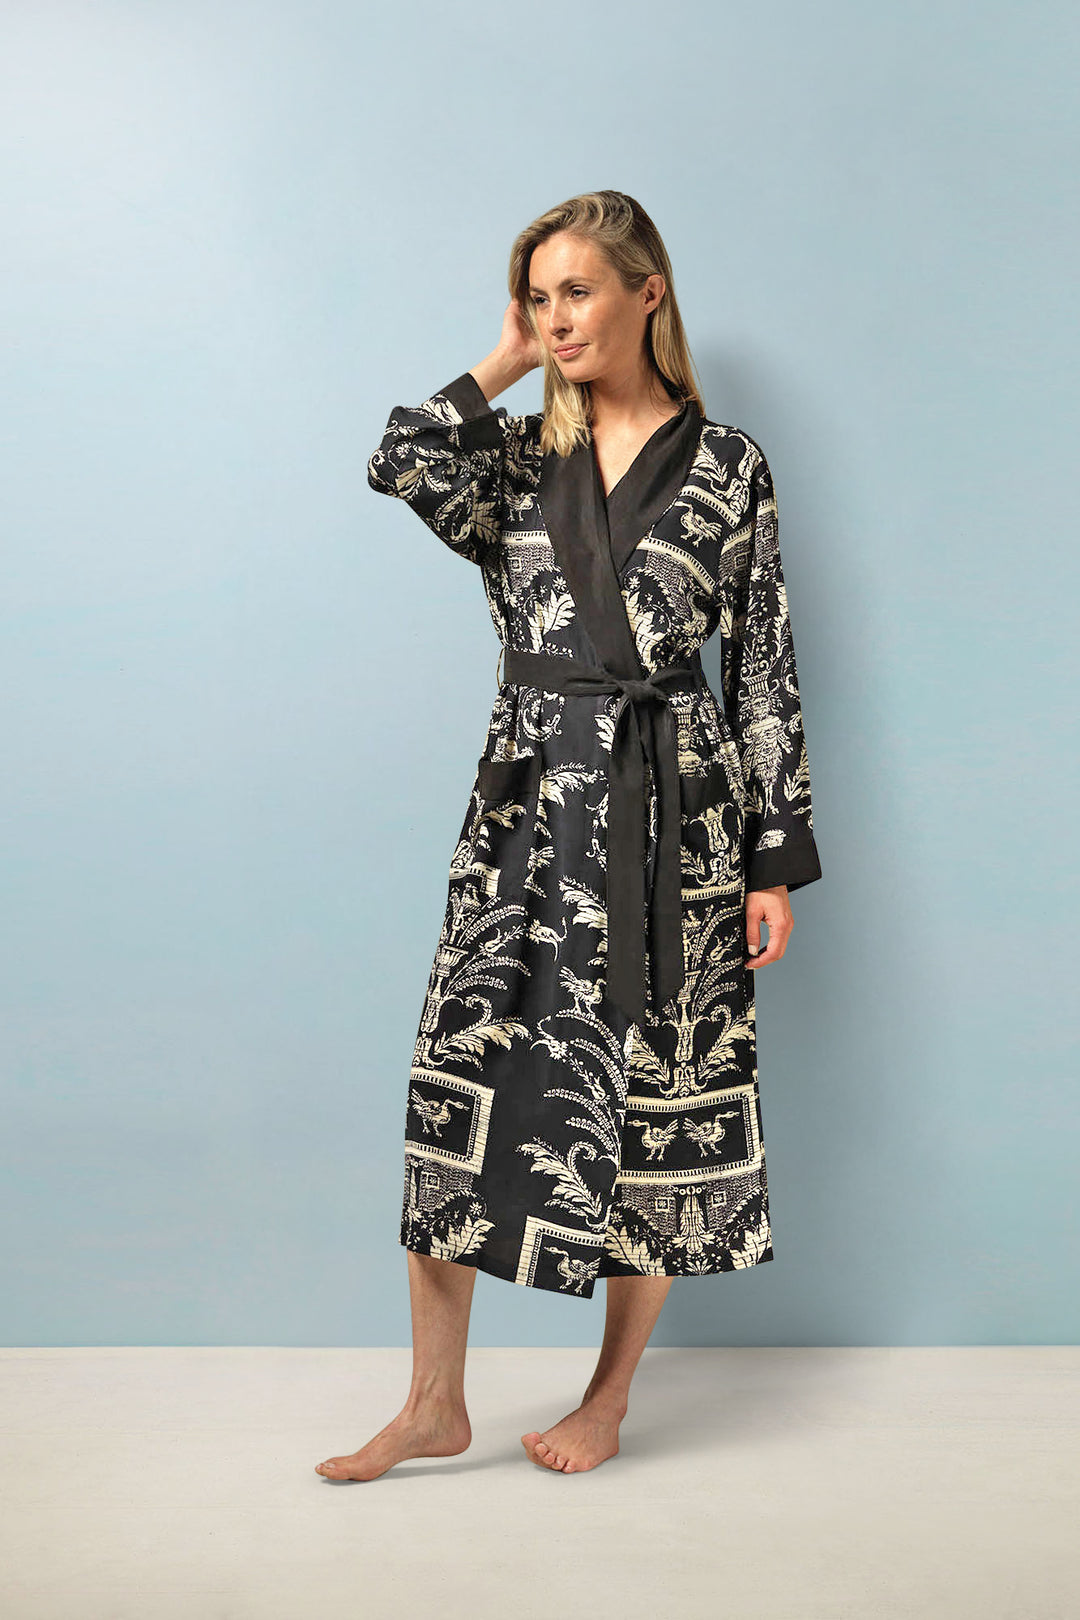 ladies crepe dressing gown in black and white vintage damask print by One Hundred Stars